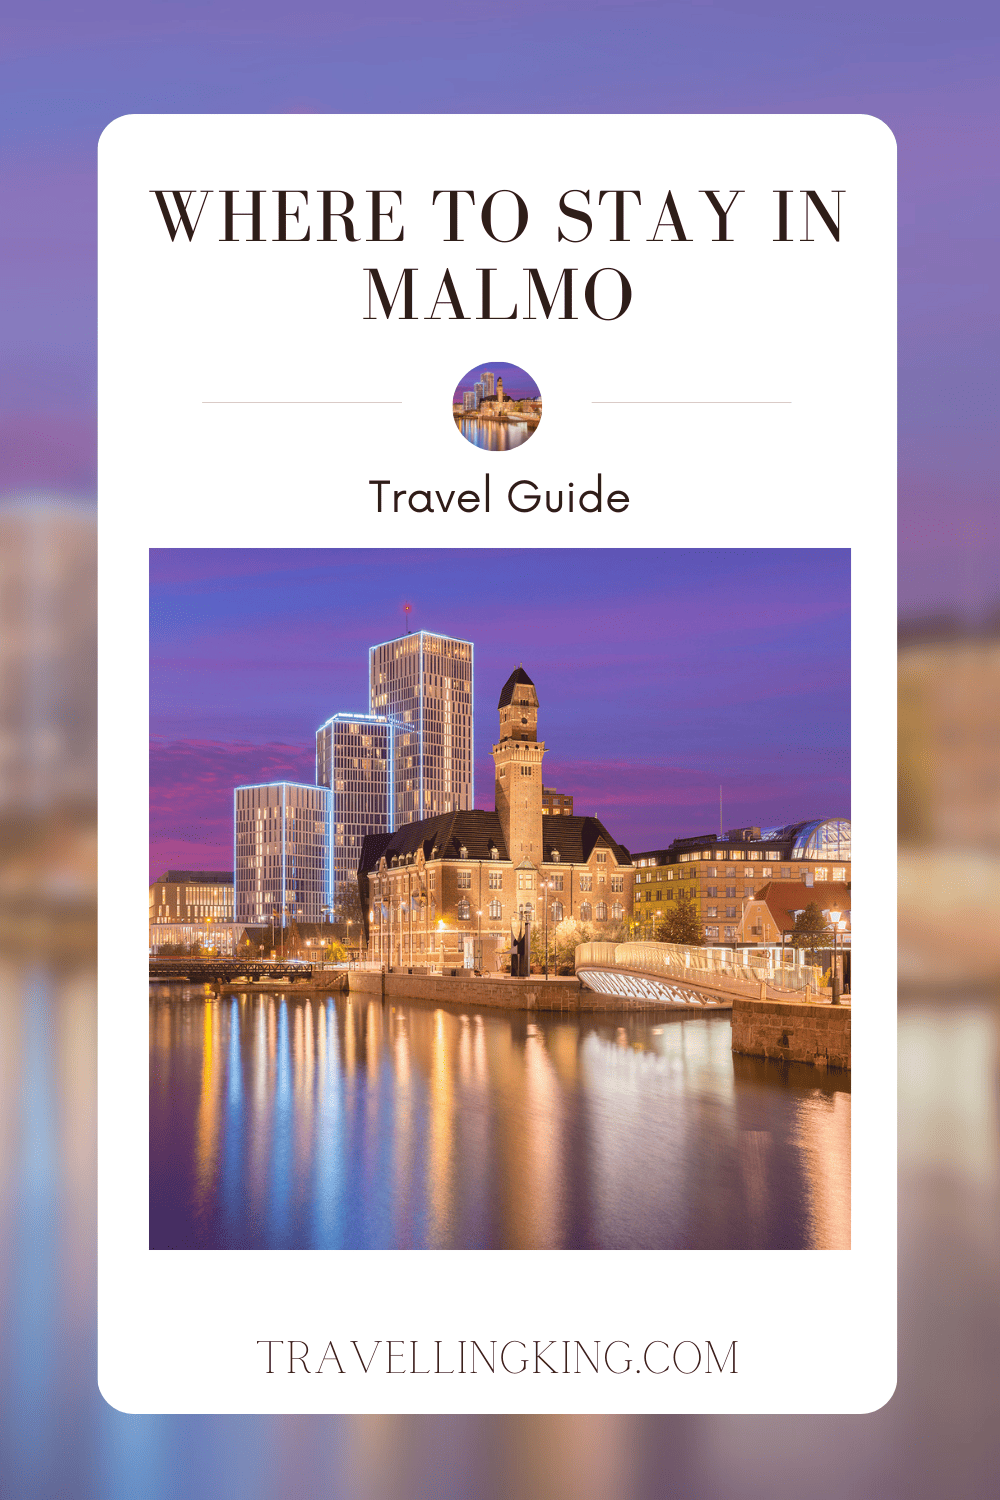 Where to stay in Malmo